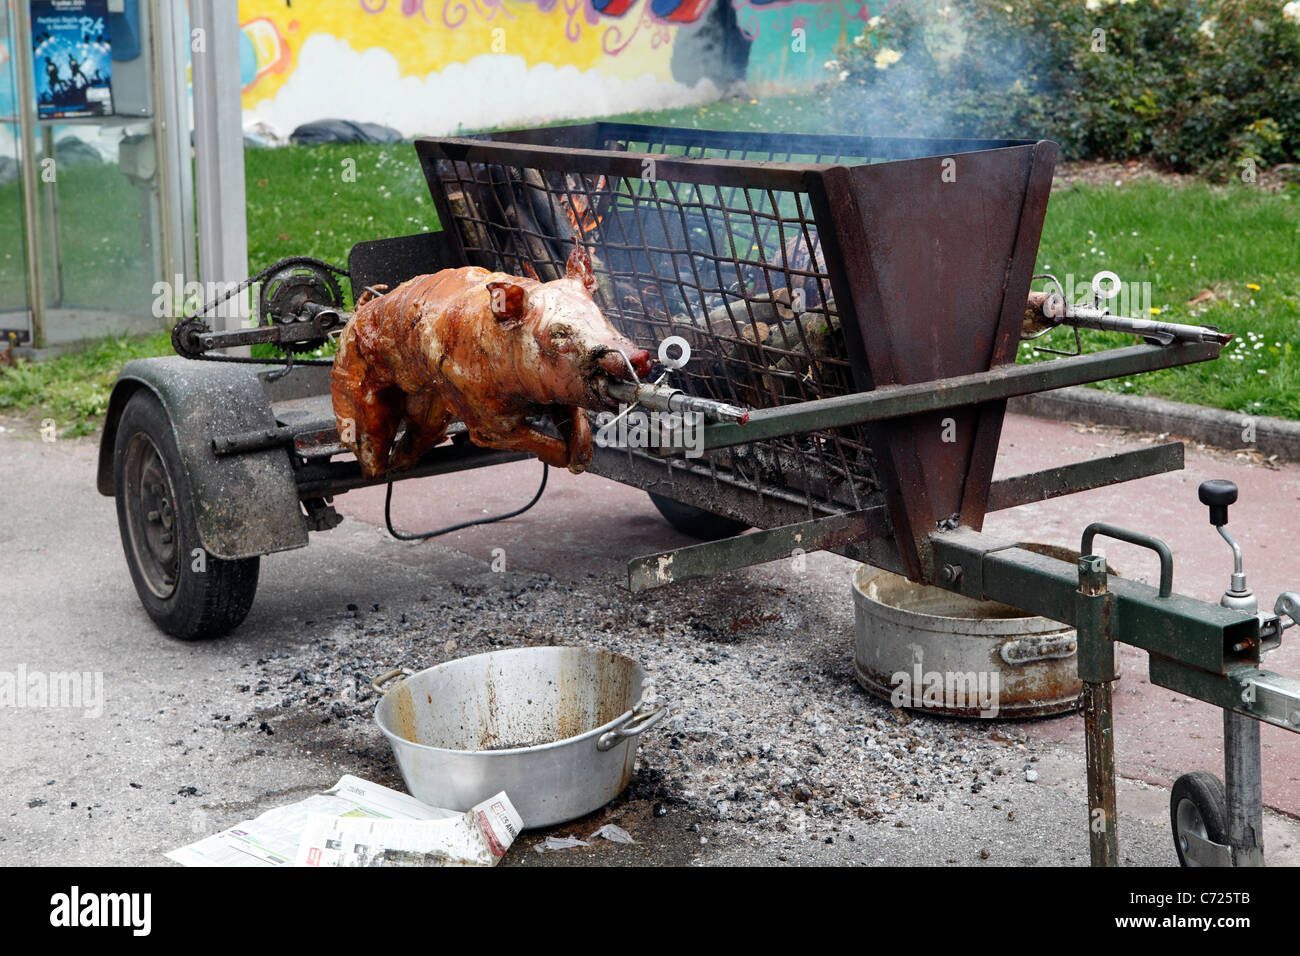 Spit roast in the street Pigs roasting on an open spindle barbeque Stock Photo